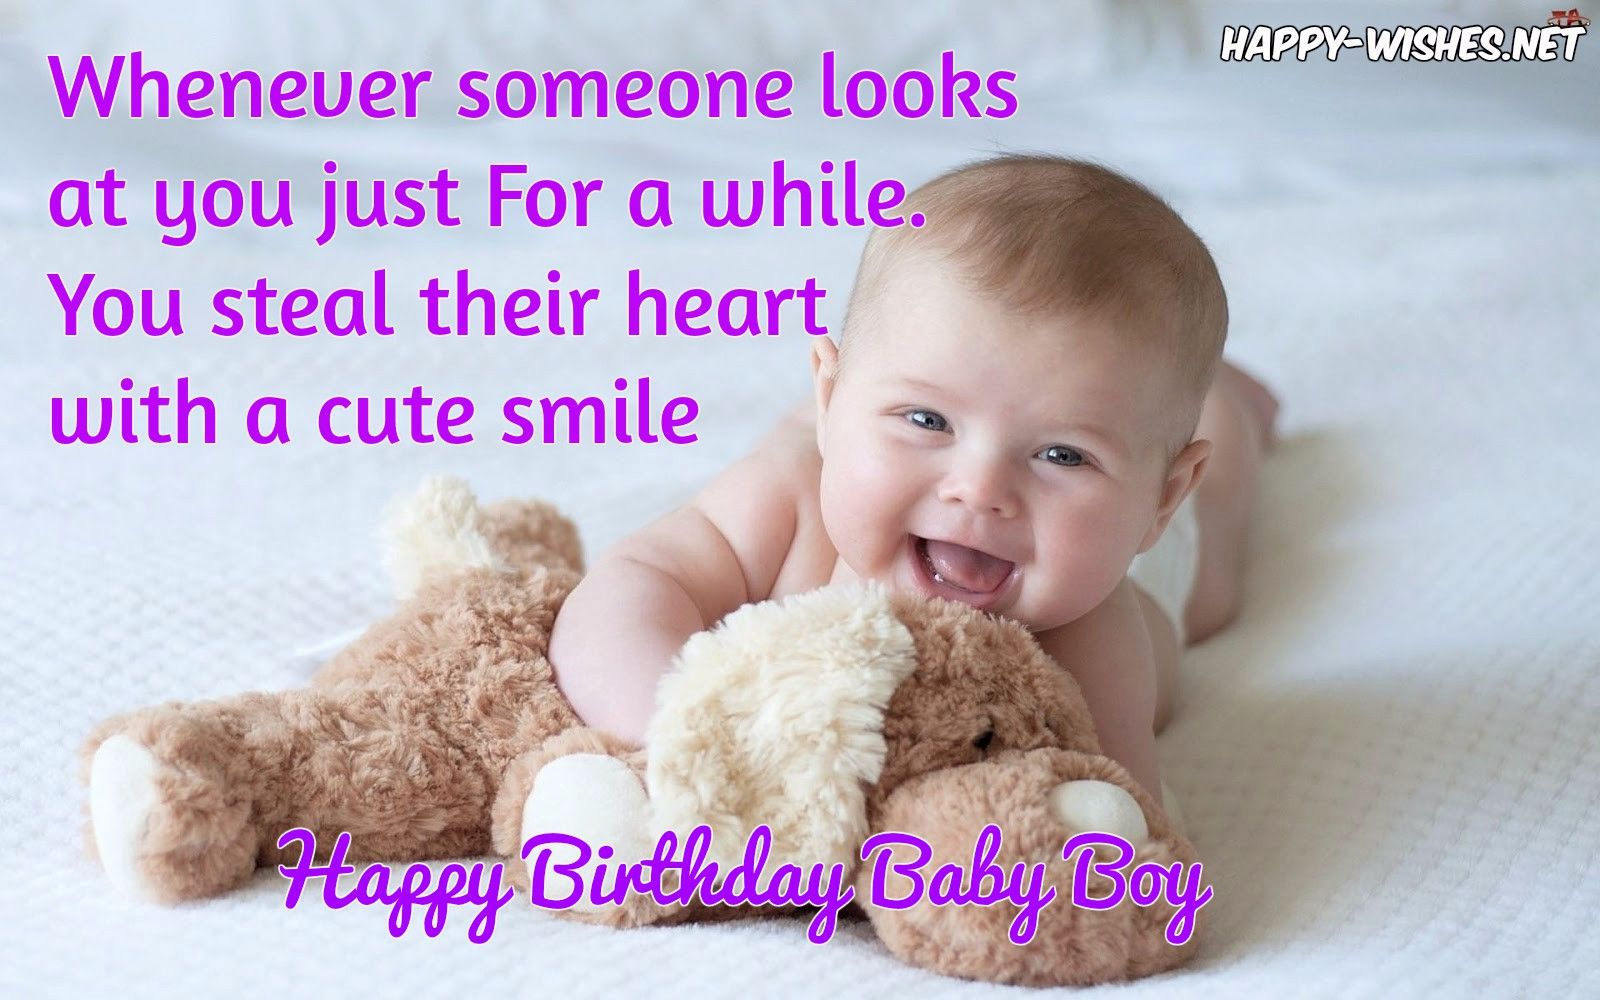 Birthday Wishes For A Baby Boy Image - Bank2home.com